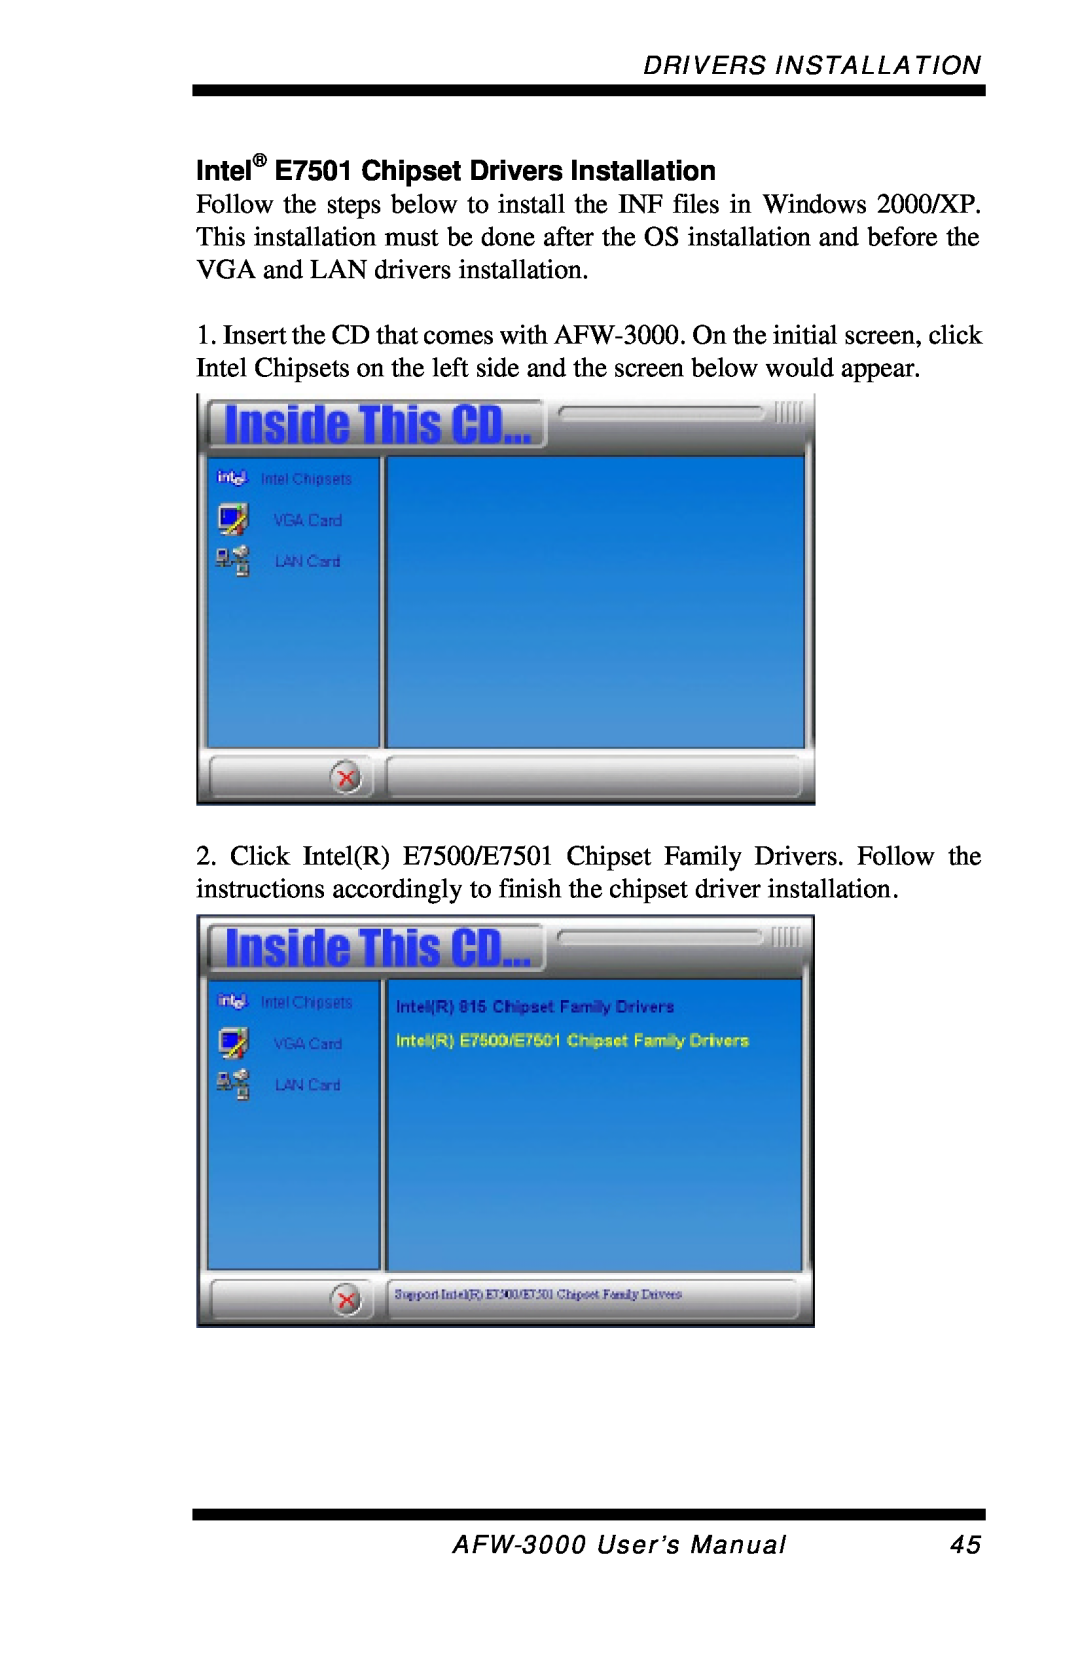 Intel user manual Intel E7501 Chipset Drivers Installation, AFW-3000User’s Manual 